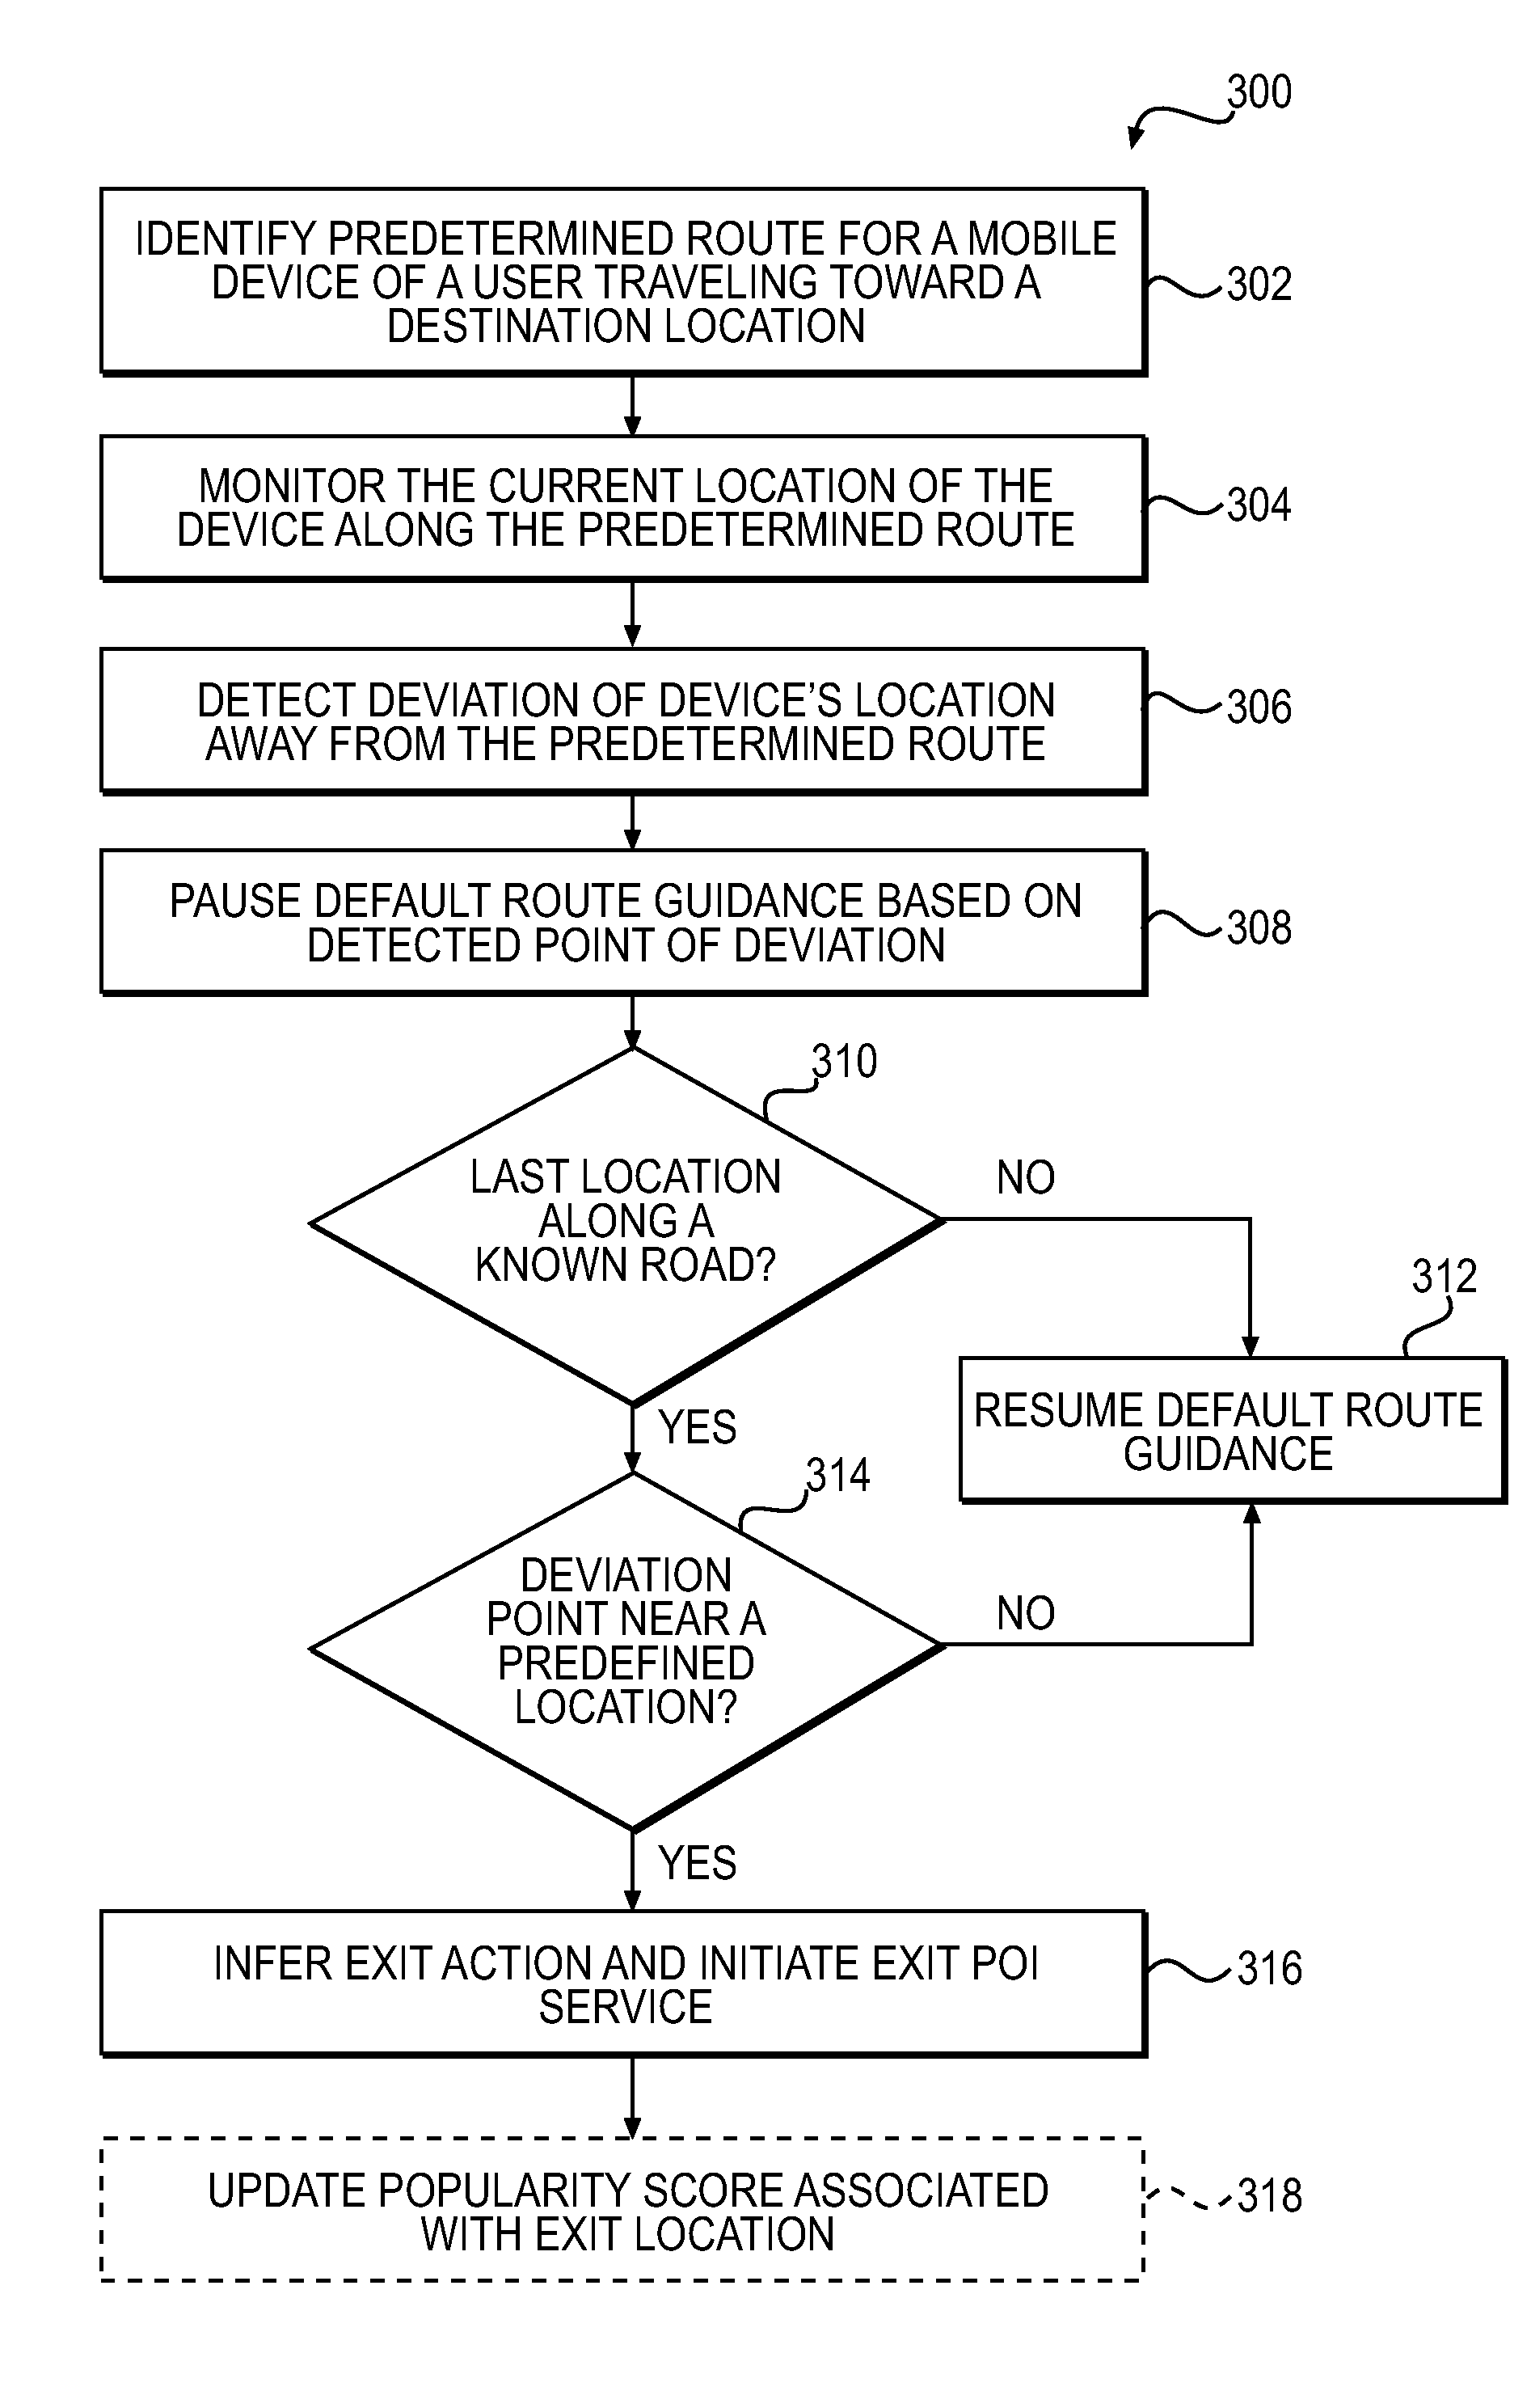 Systems and methods for initiating mapping exit routines and rating highway exits